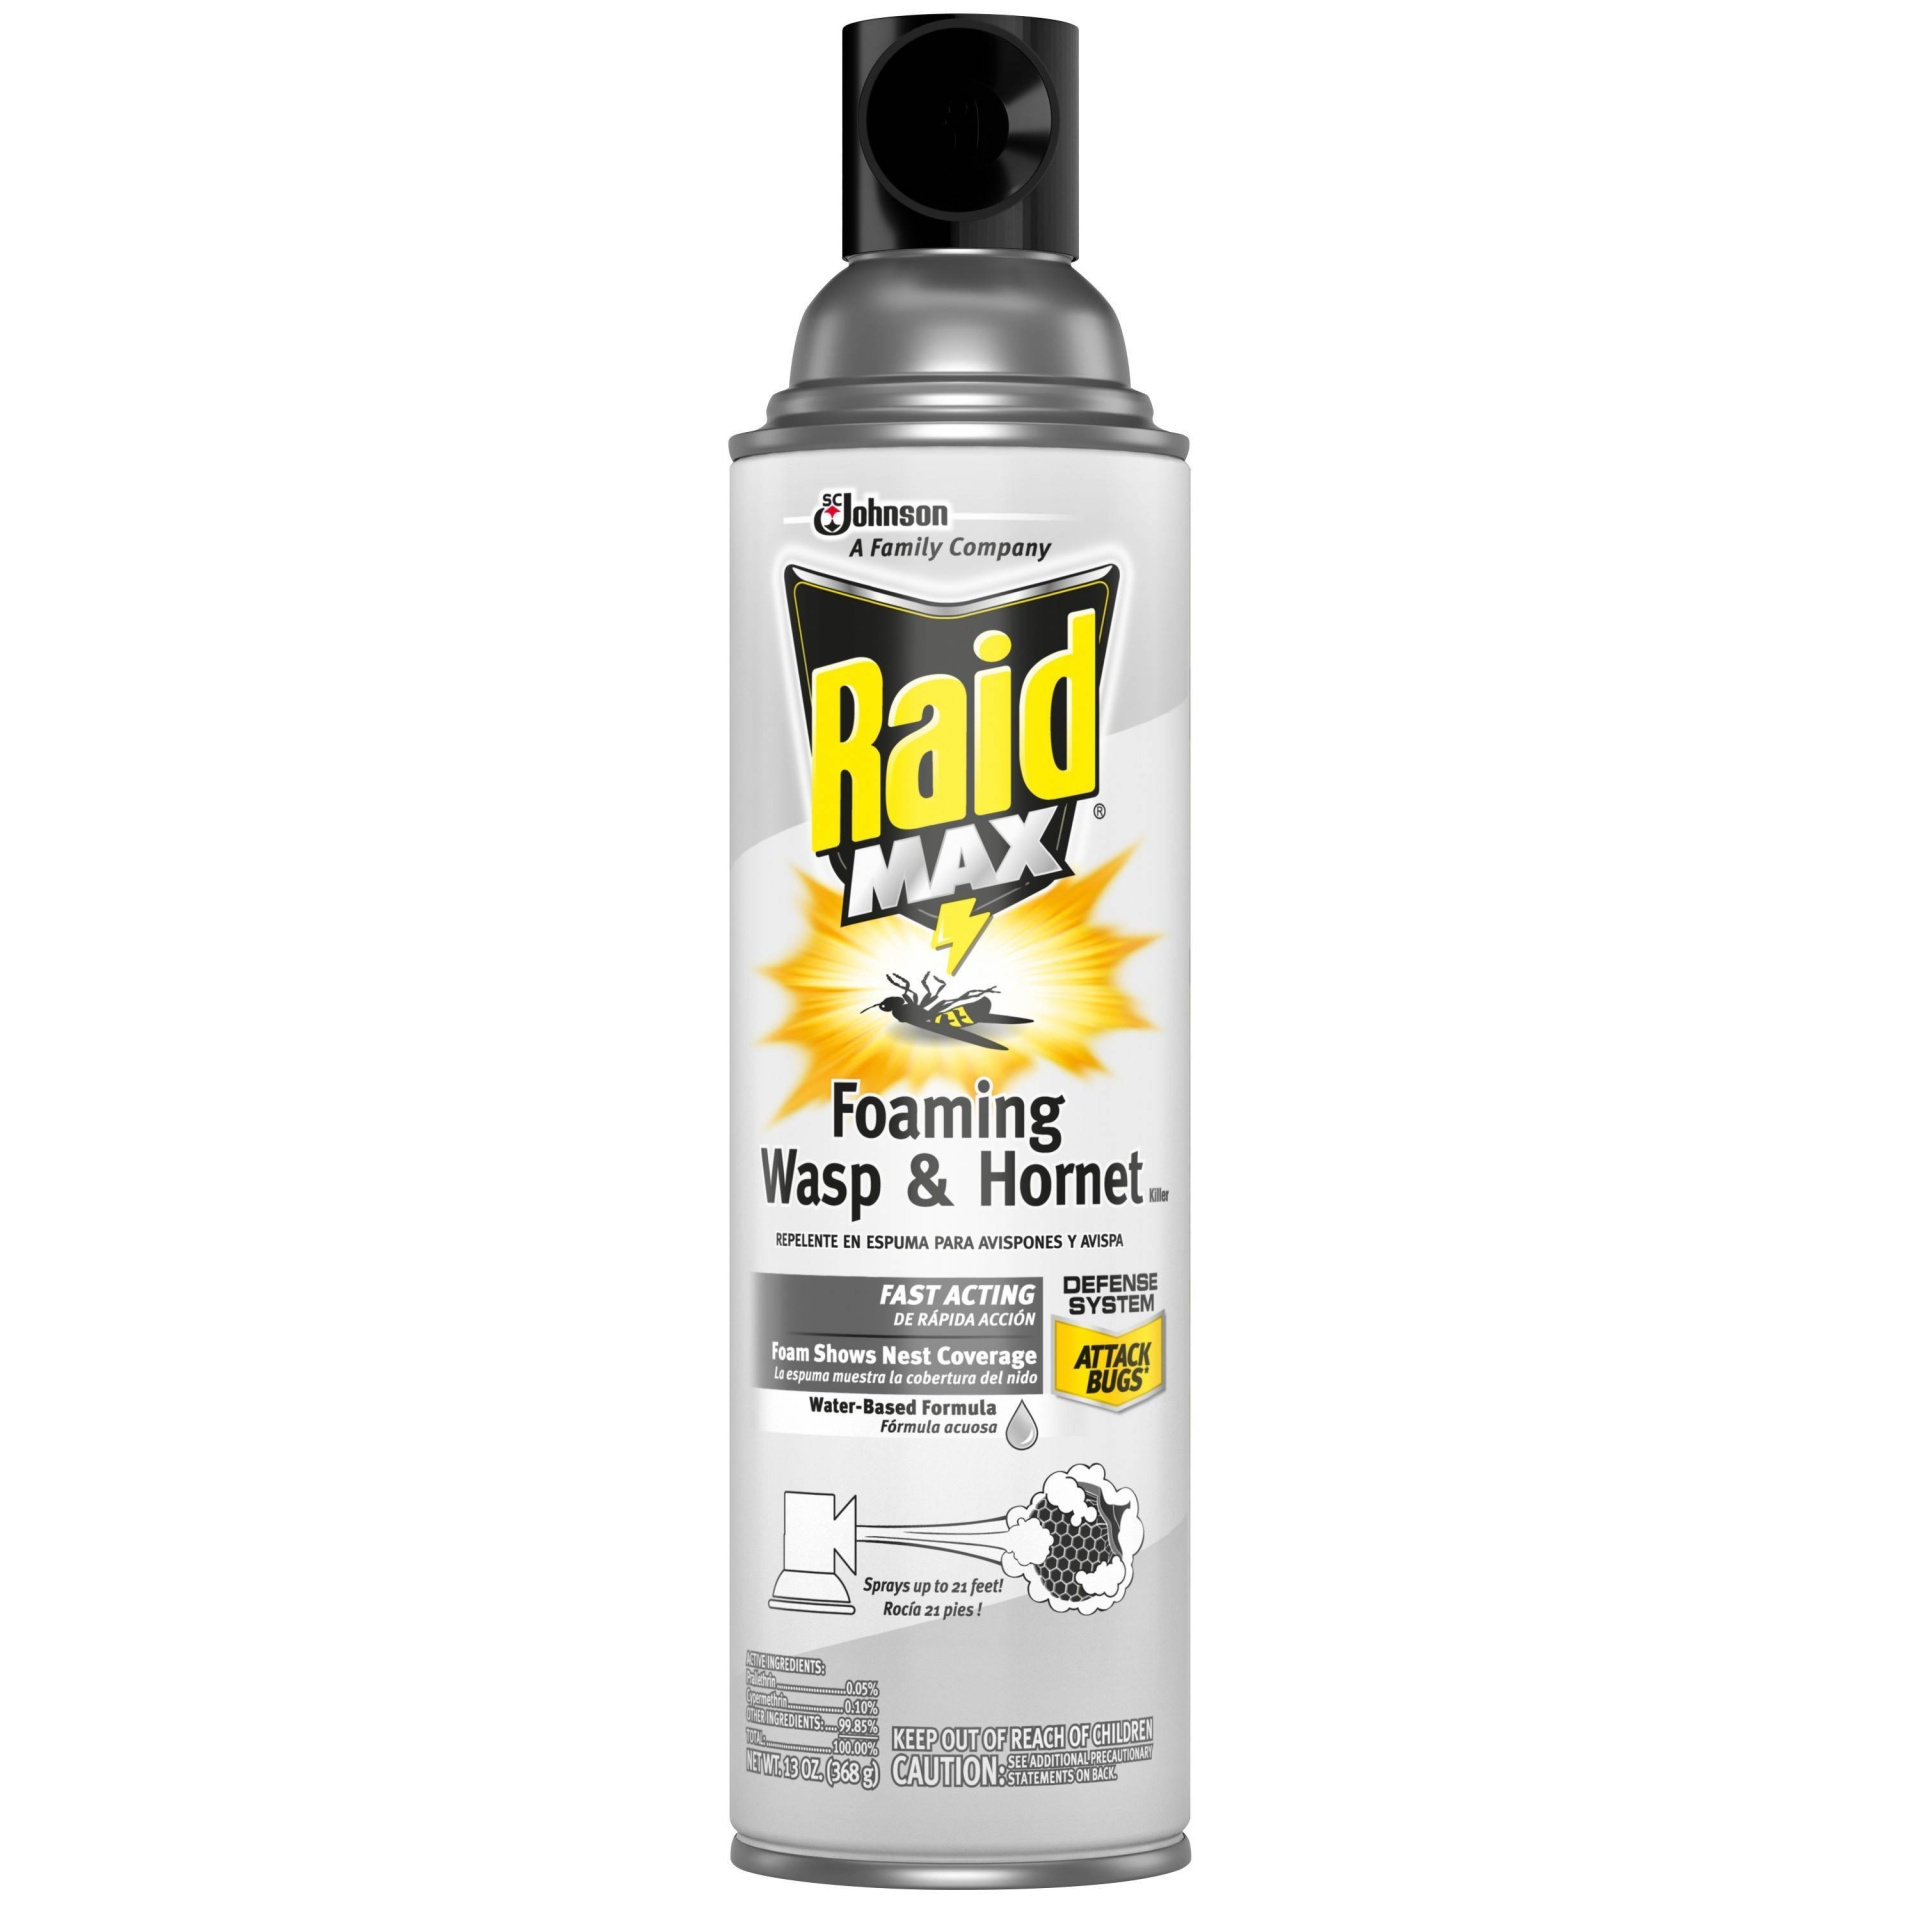 slide 1 of 4, Raid Max Foaming Wasp & Hornet Insecticide, 13 fl oz